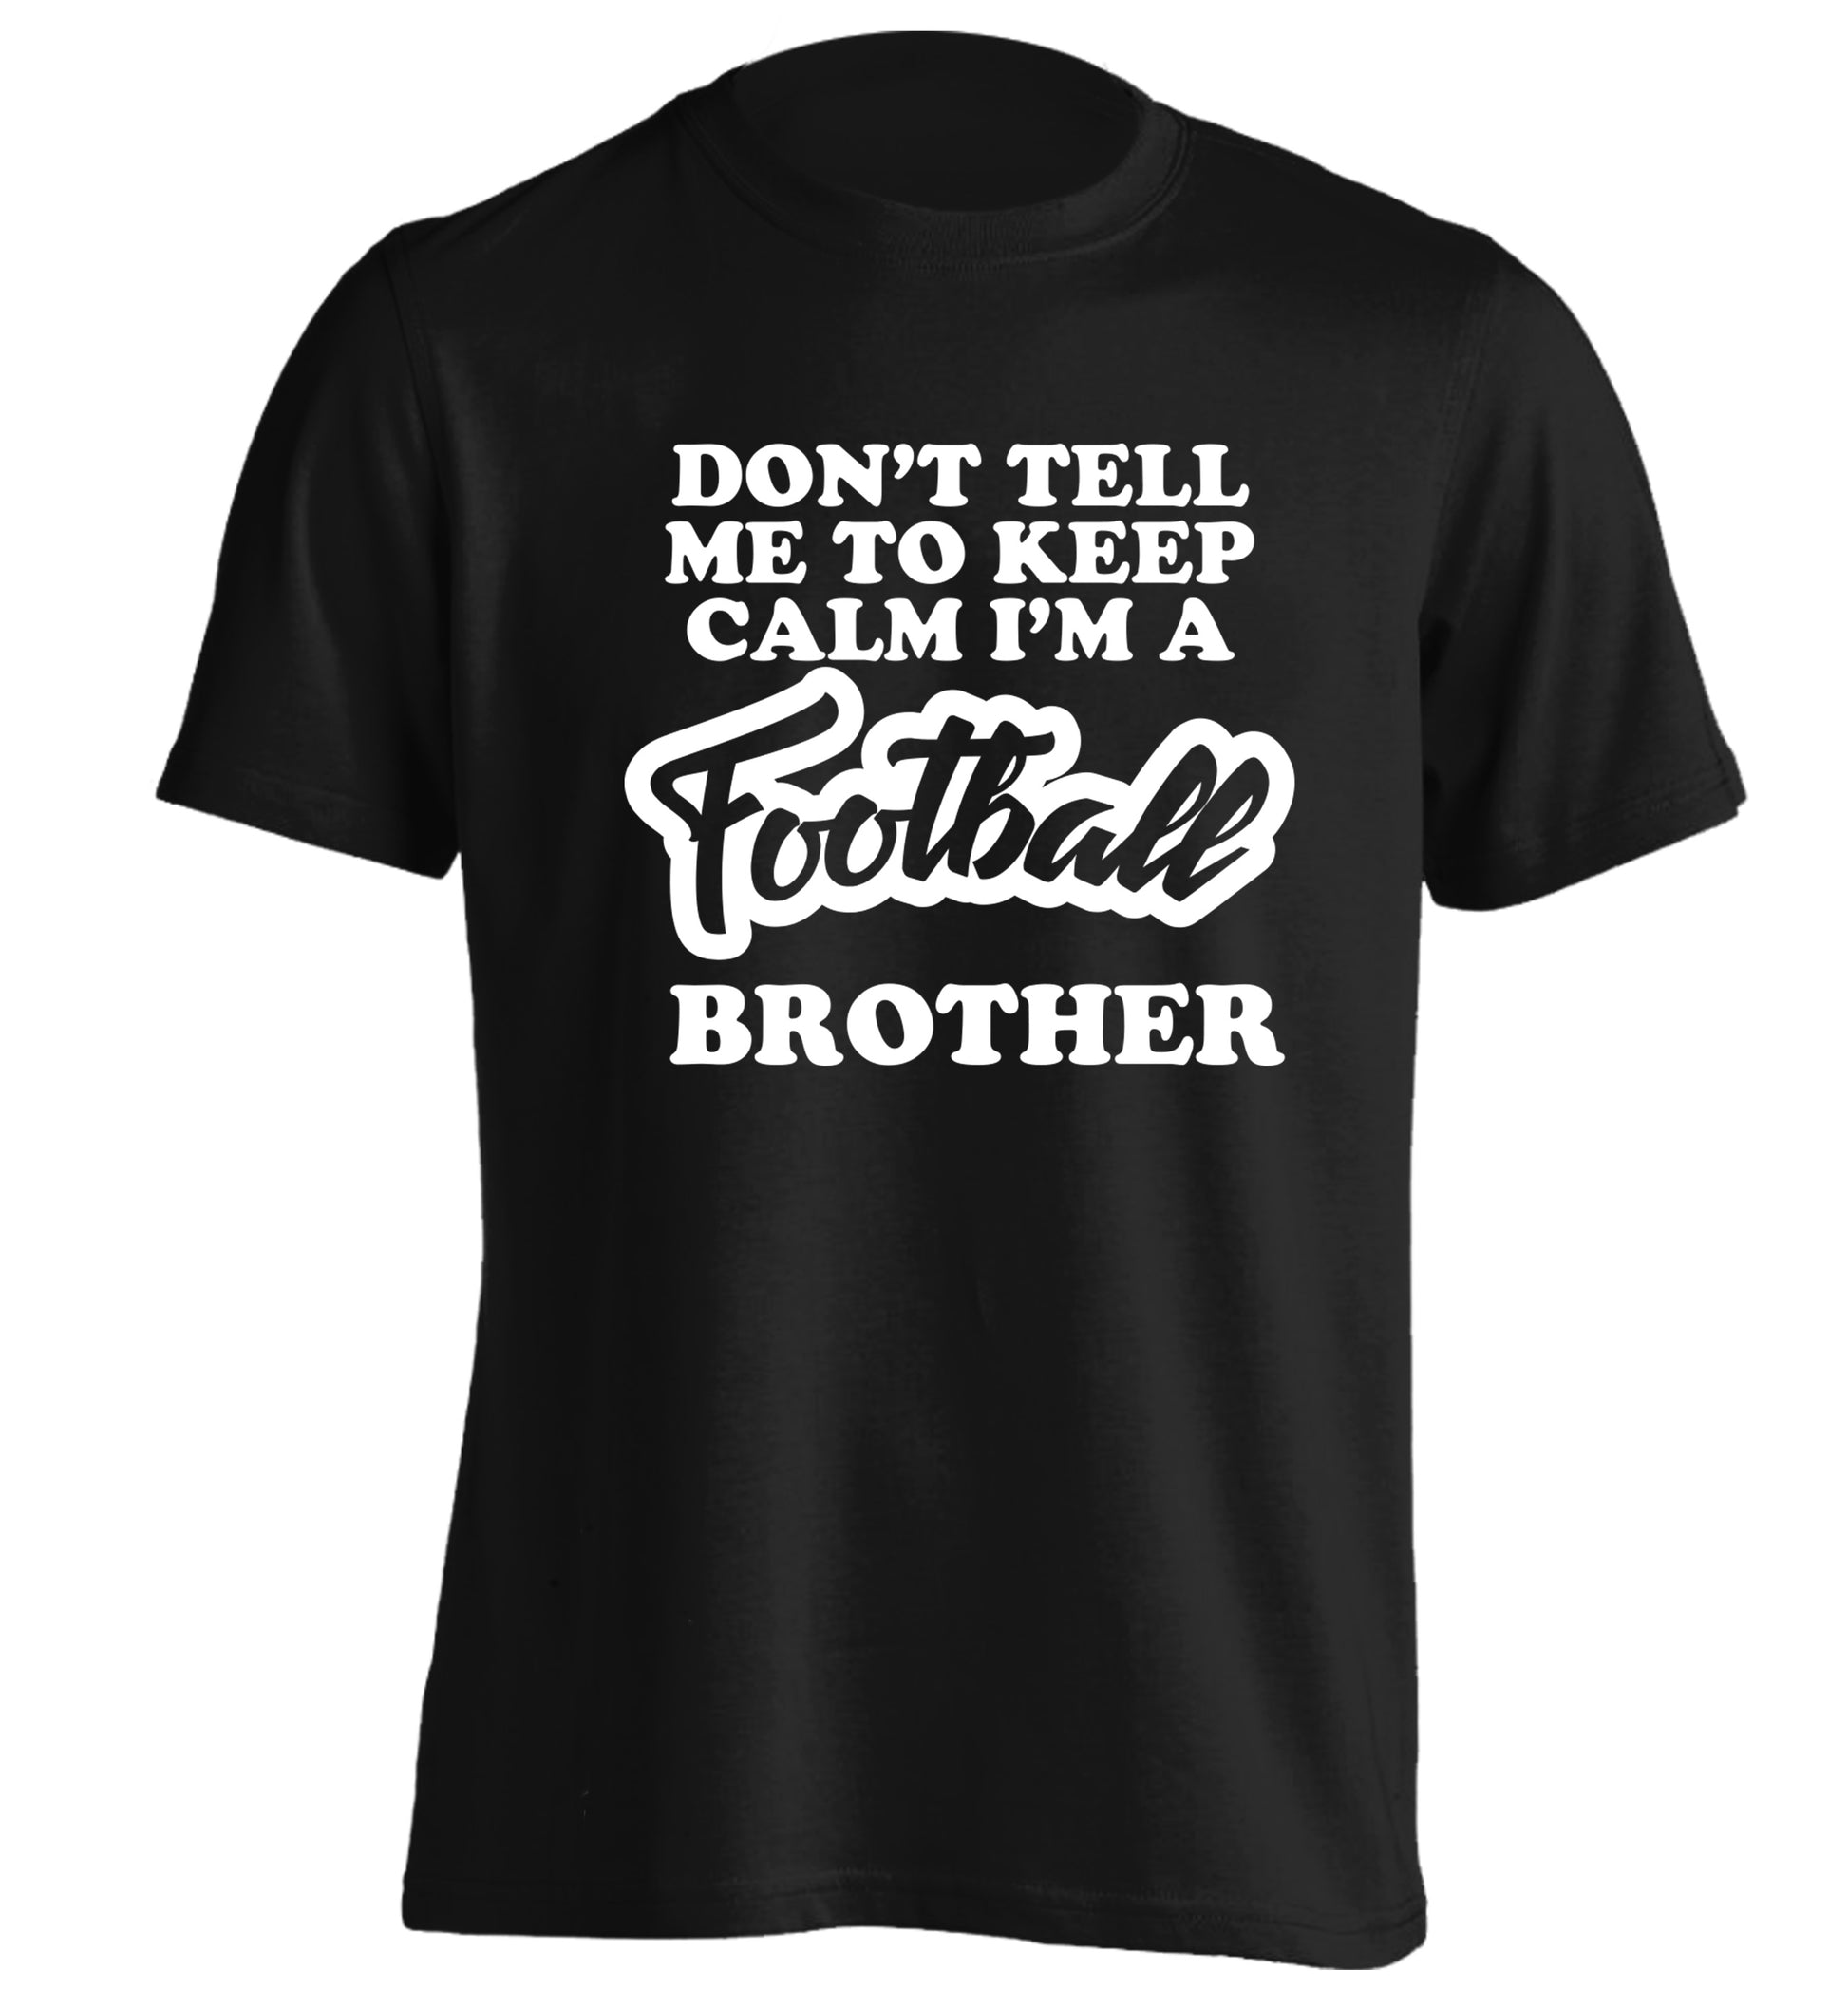 Don't tell me to keep calm I'm a football brother adults unisexblack Tshirt 2XL